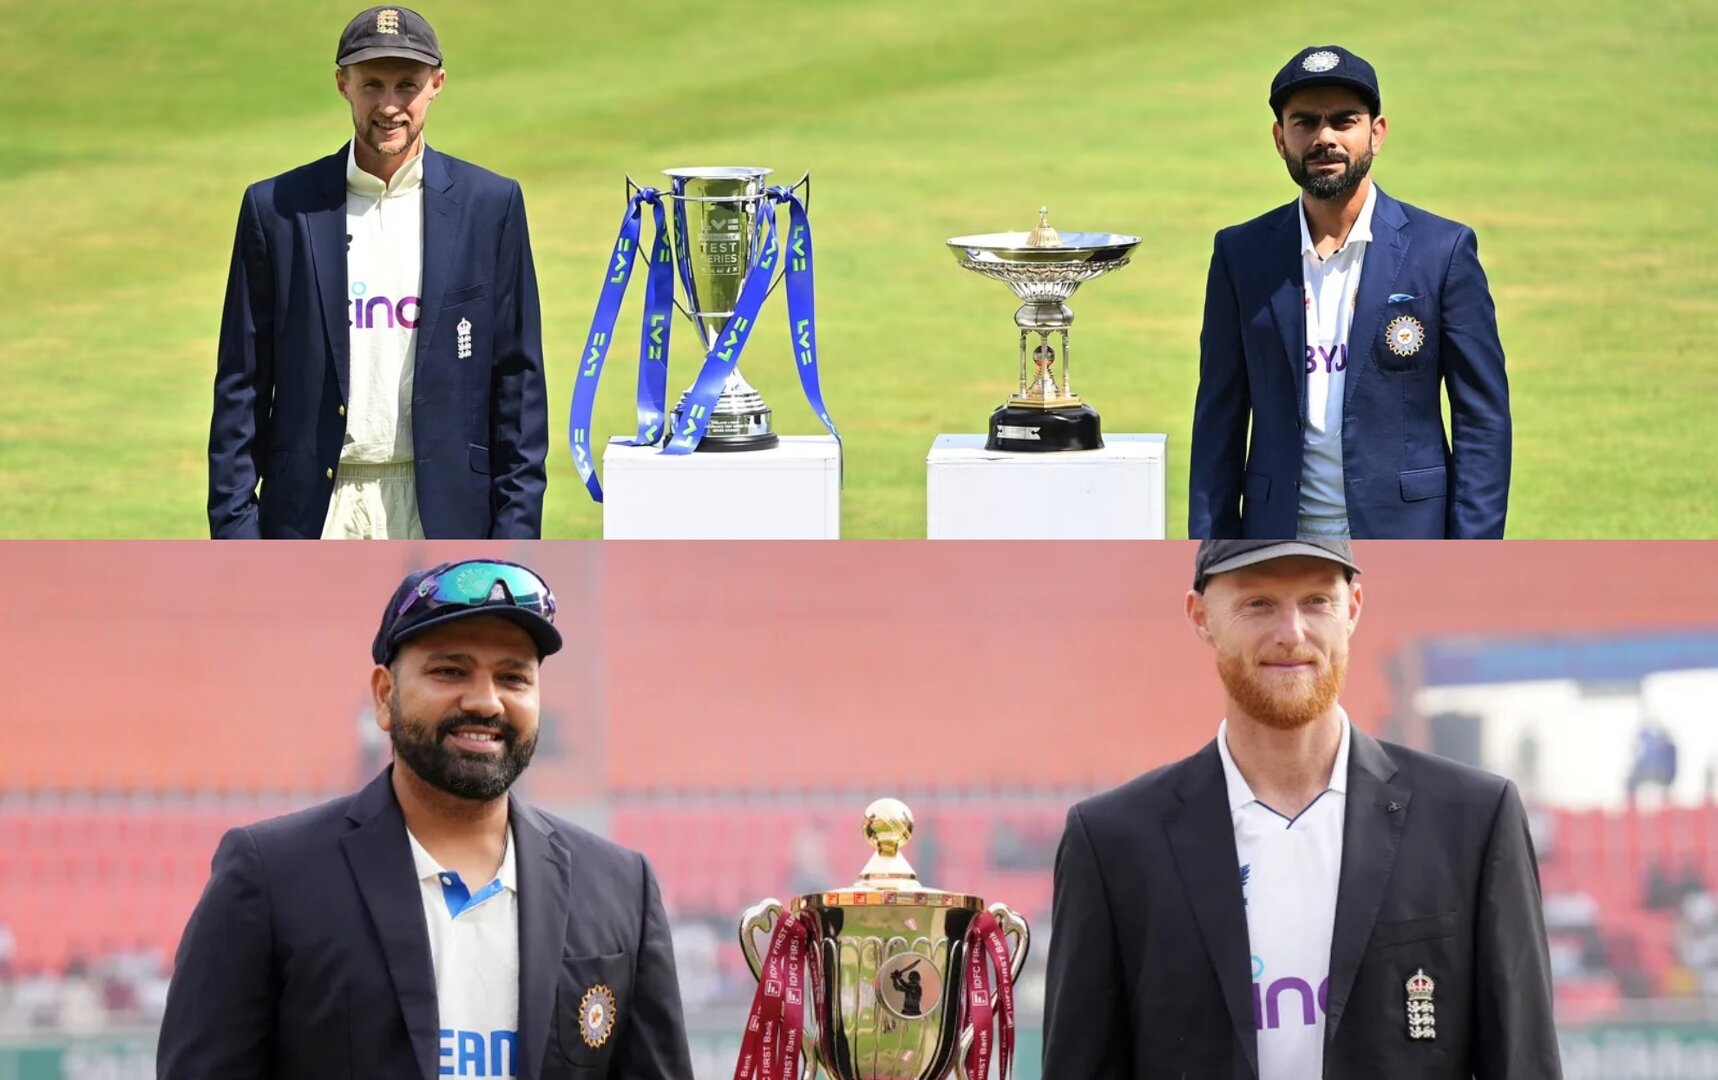 IND vs ENG - Distinguish between the Anthony de Mello Trophy and Pataudi Trophy